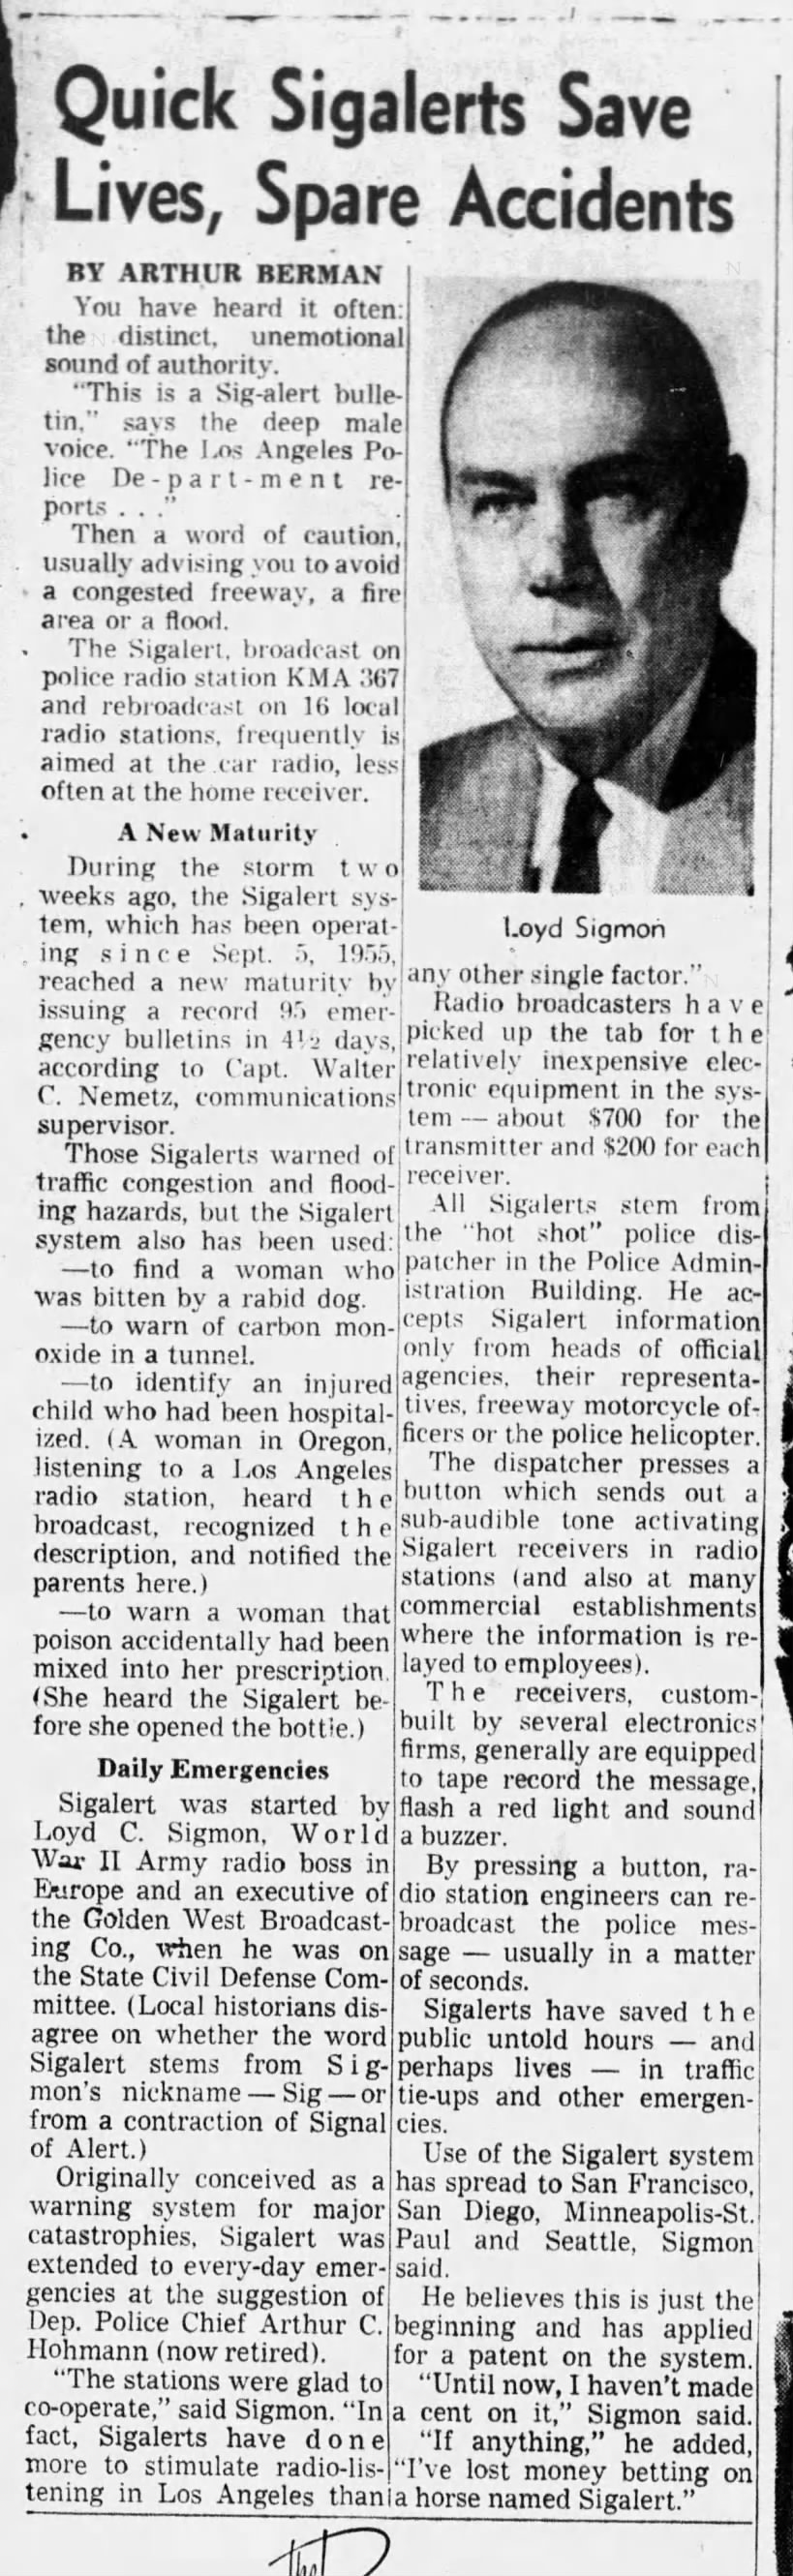 Arthur Berman, "Quick Sigalerts Save Lives, Spare Accidents," L.A. Times, February 25, 1962,F5